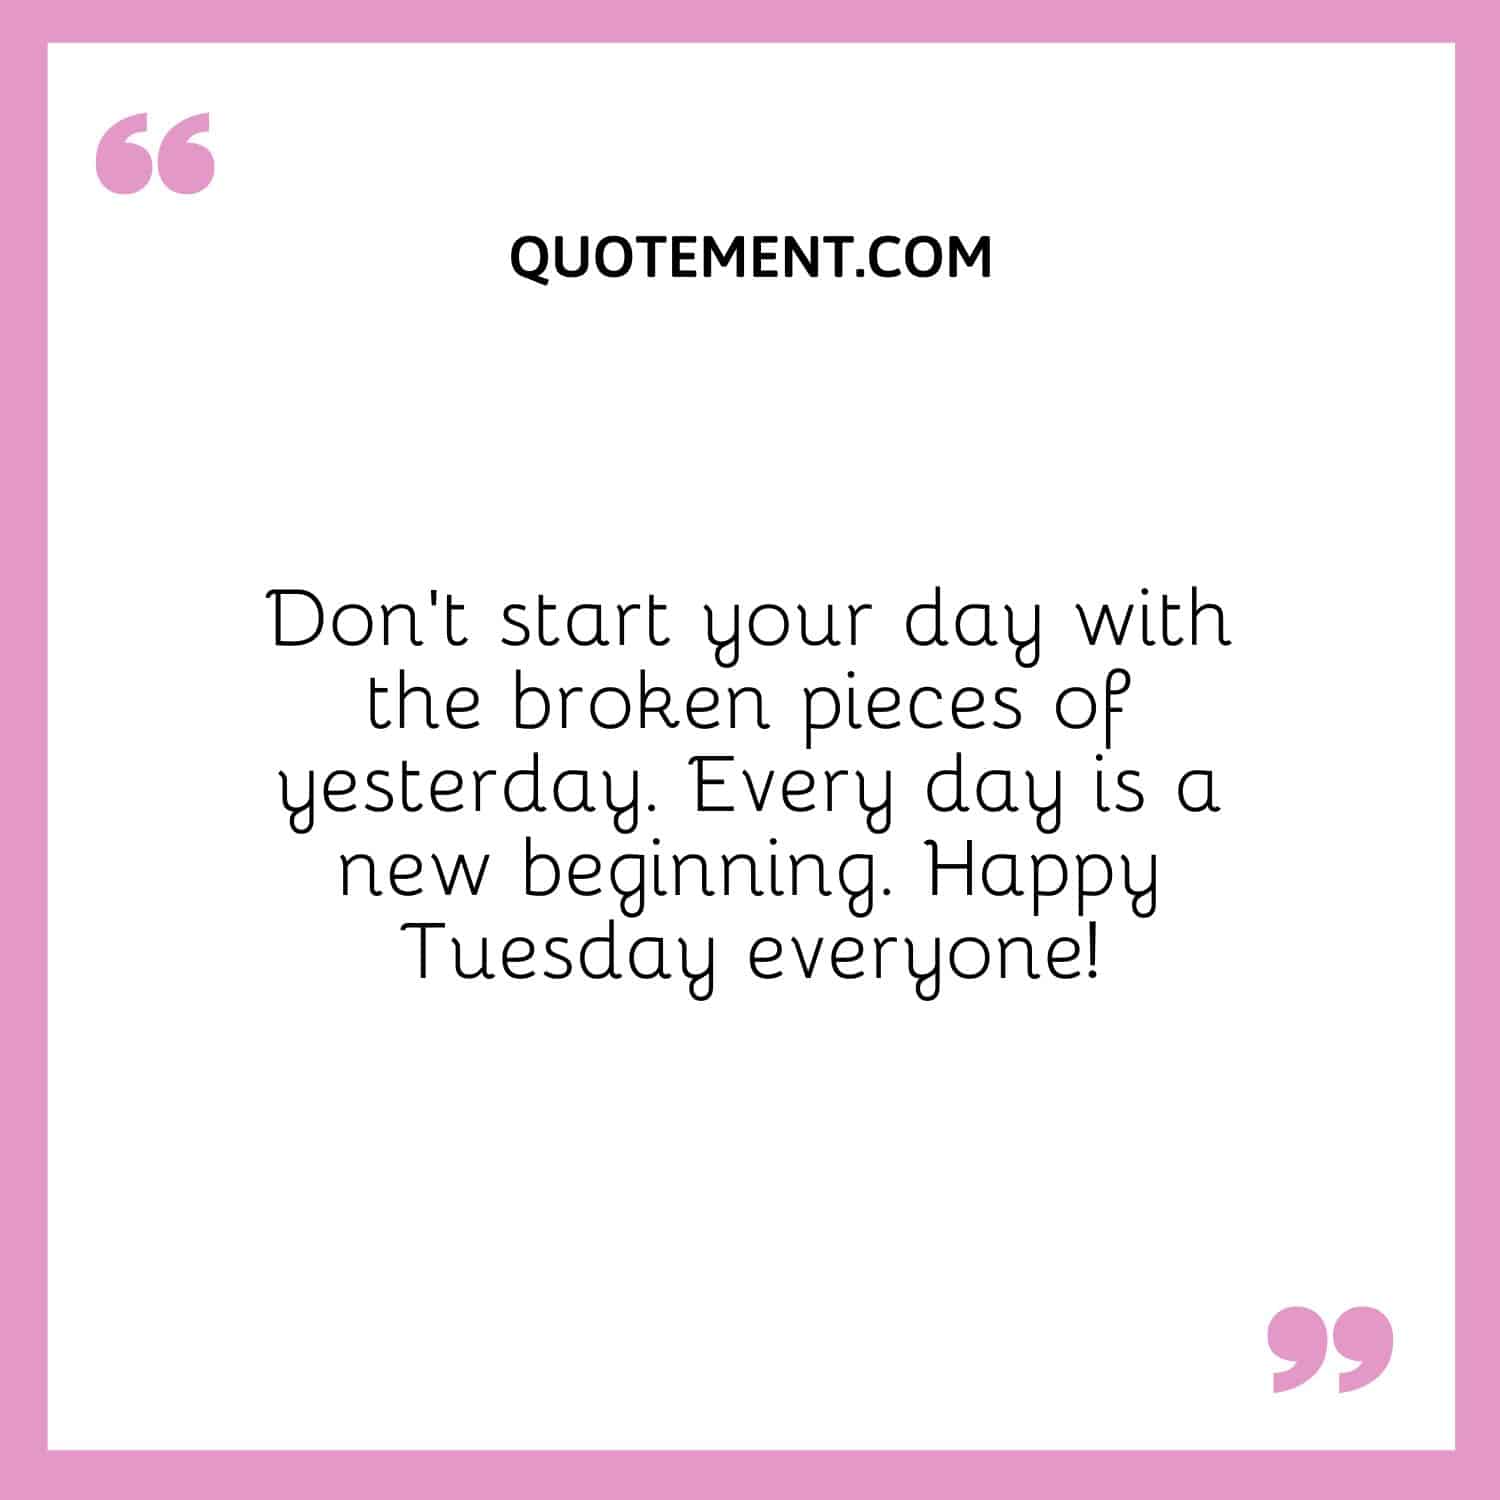 Don’t start your day with the broken pieces of yesterday. Every day is a new beginning. Happy Tuesday everyone!